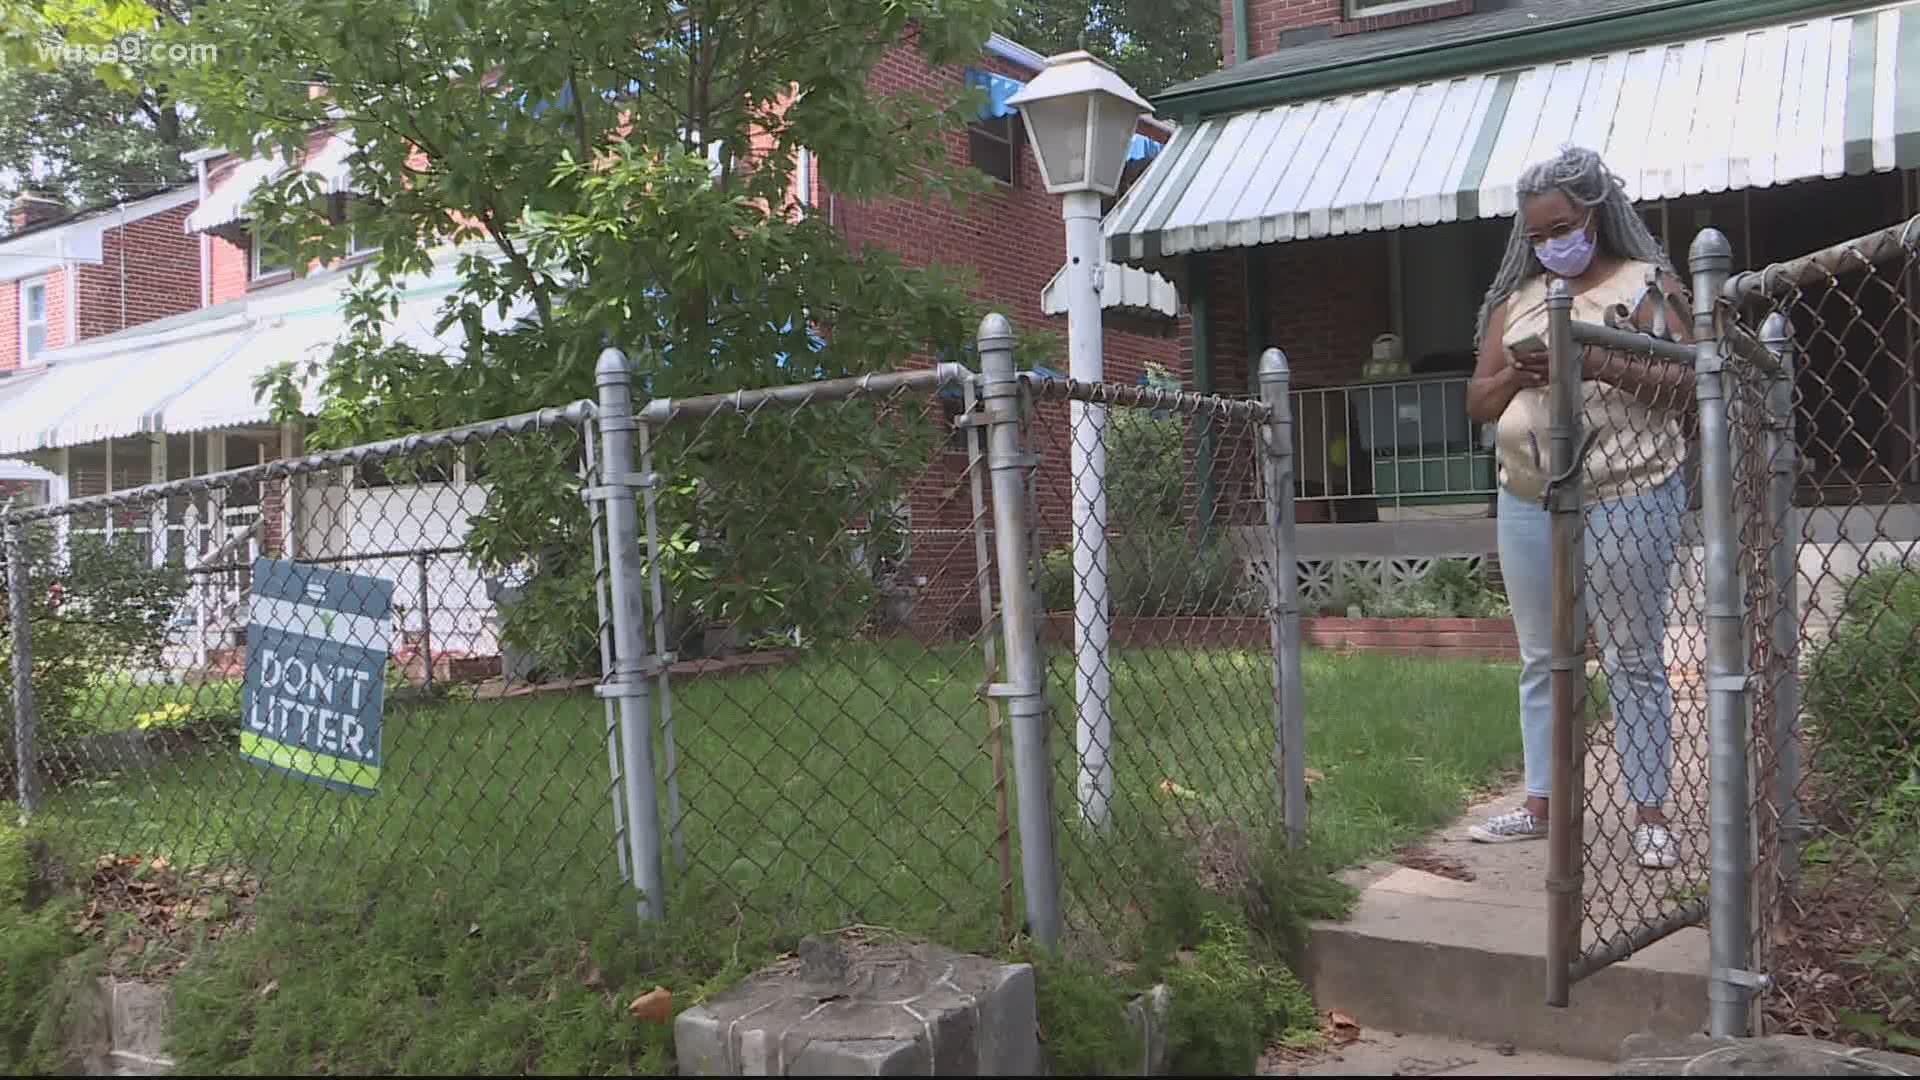 Residents in southeast DC say the rampant crime in the area is causing them to consider moving out of the neighborhood